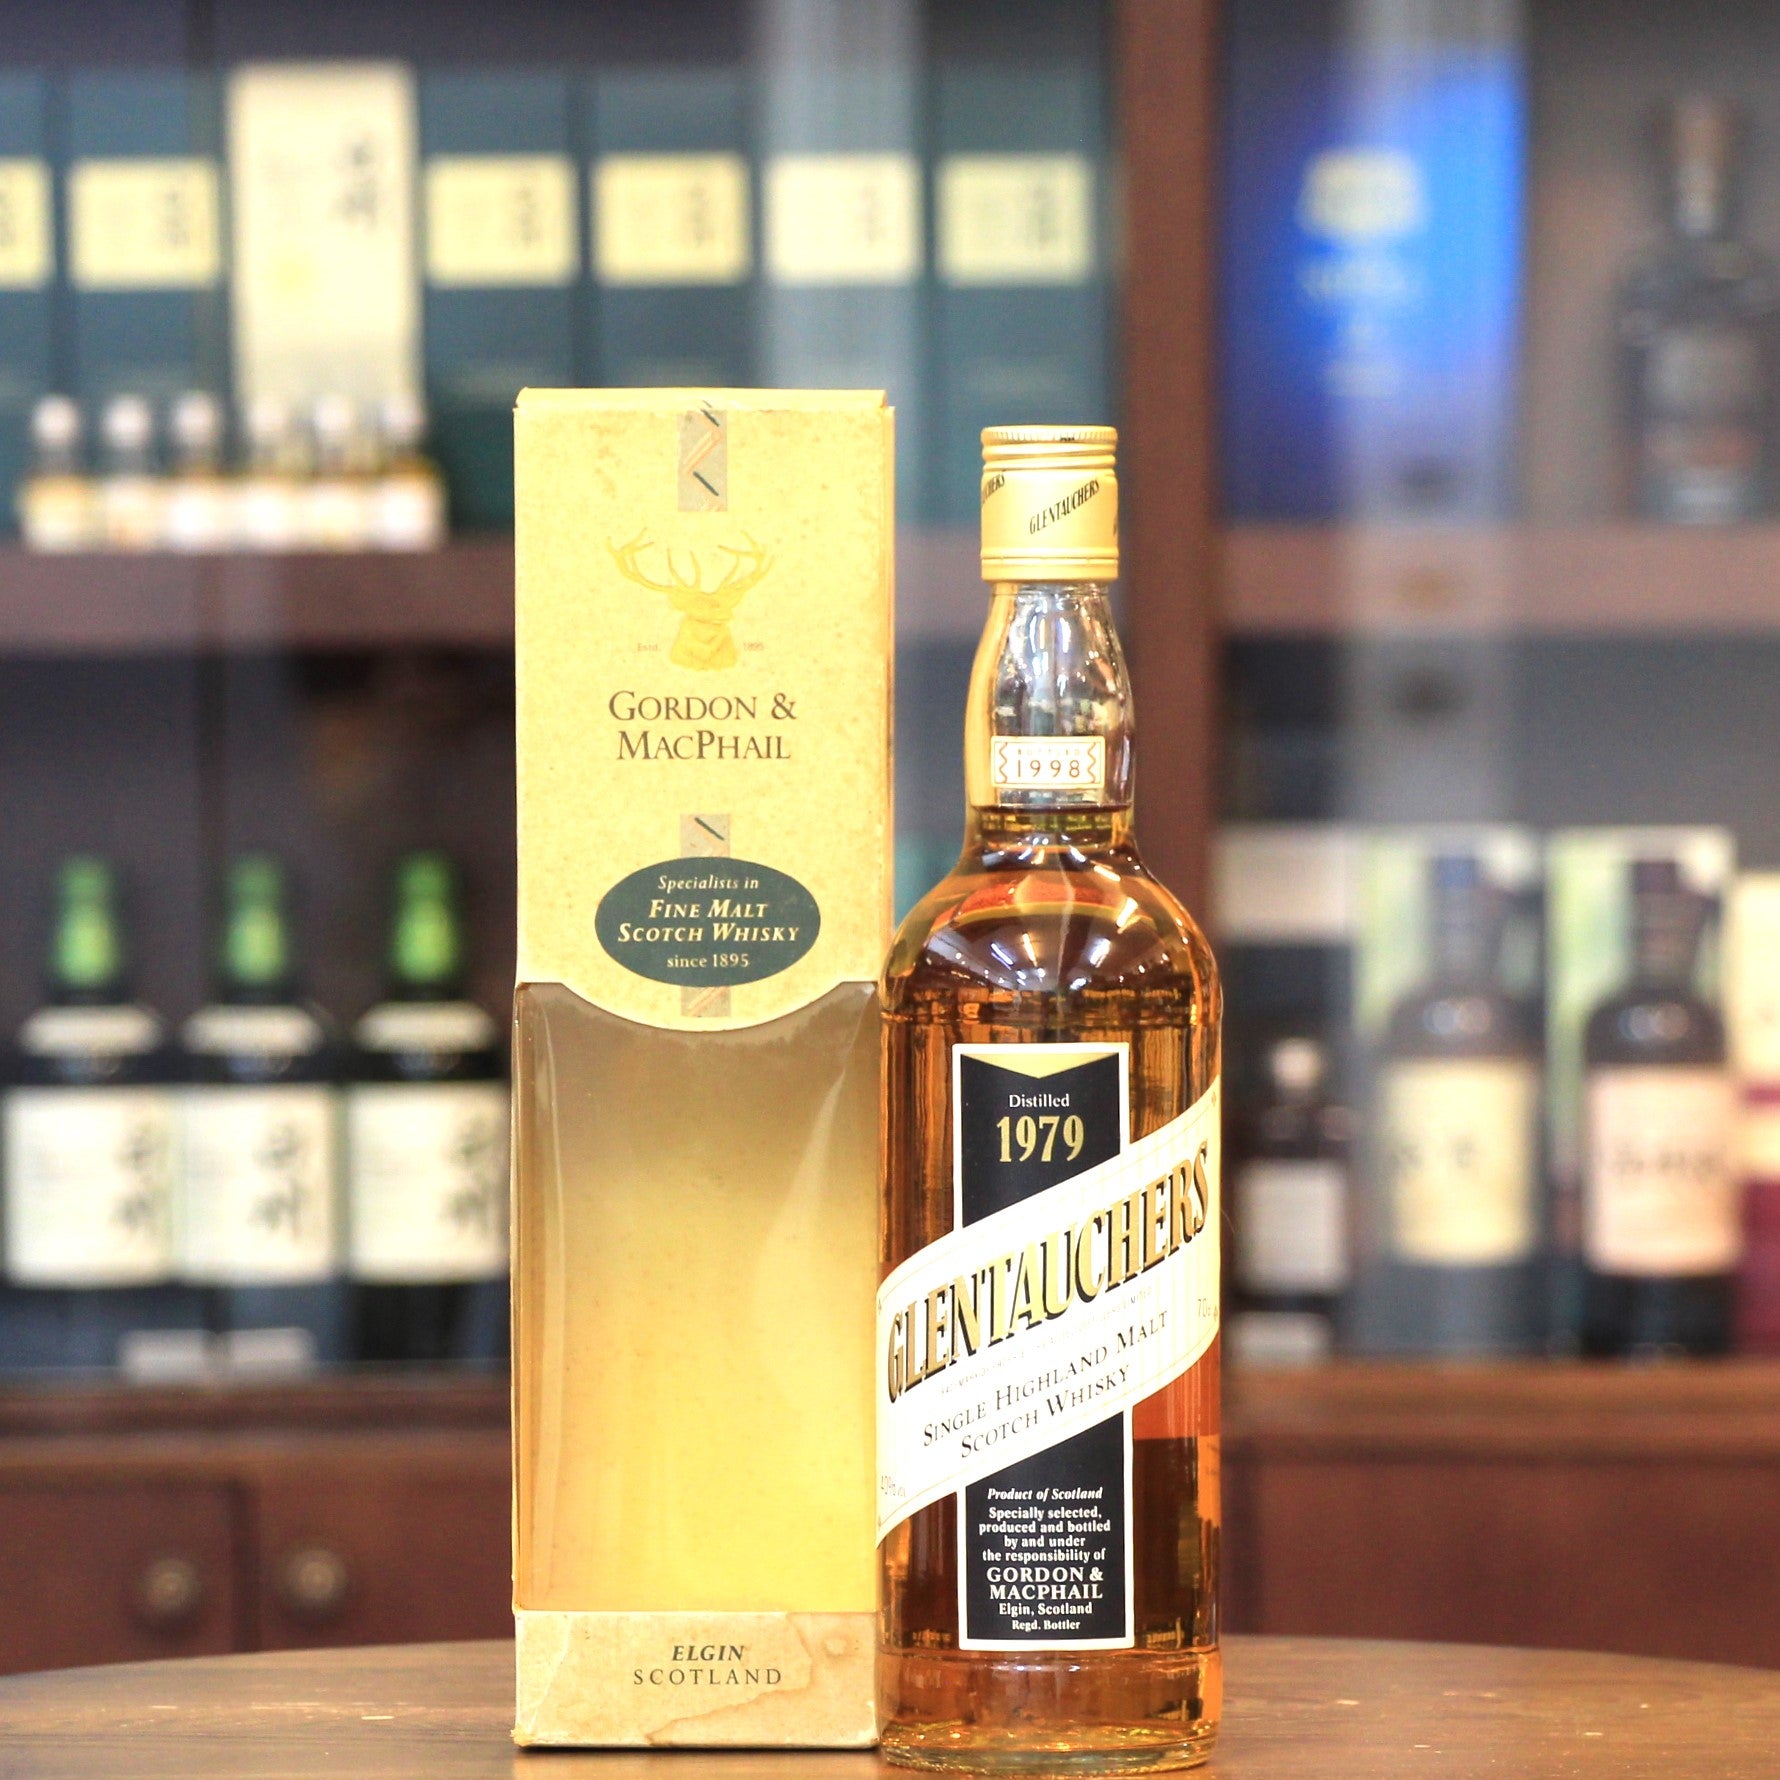 Glentauchers Vintage 1979 and bottled in 1998, this whisky is celebrate 100 years old production at distillery, 1898 - 1998. 